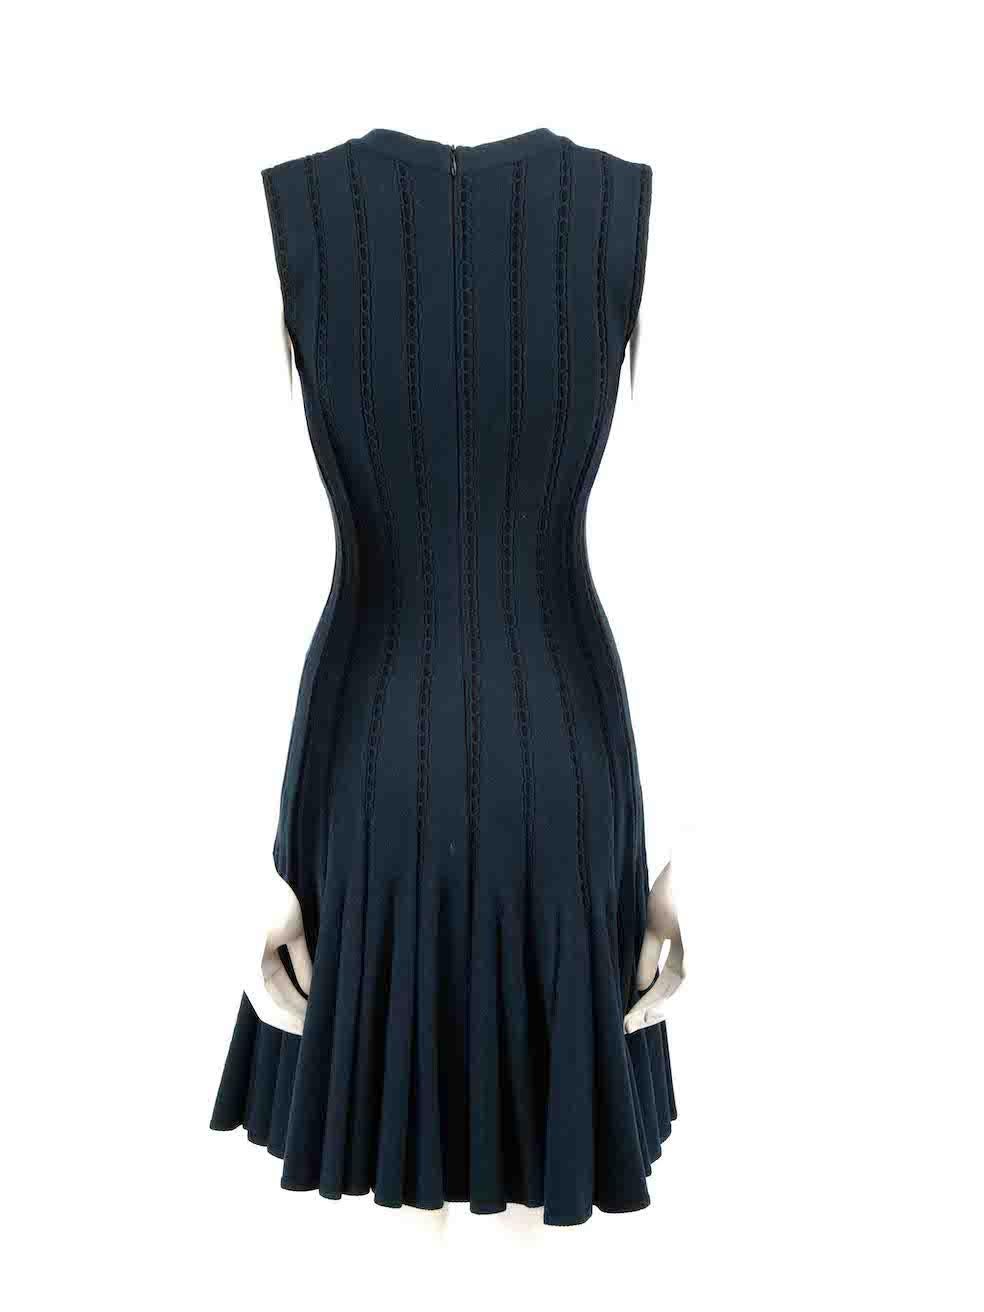 Alaïa Navy Knitted Sleeveless Dress Size M In Excellent Condition For Sale In London, GB